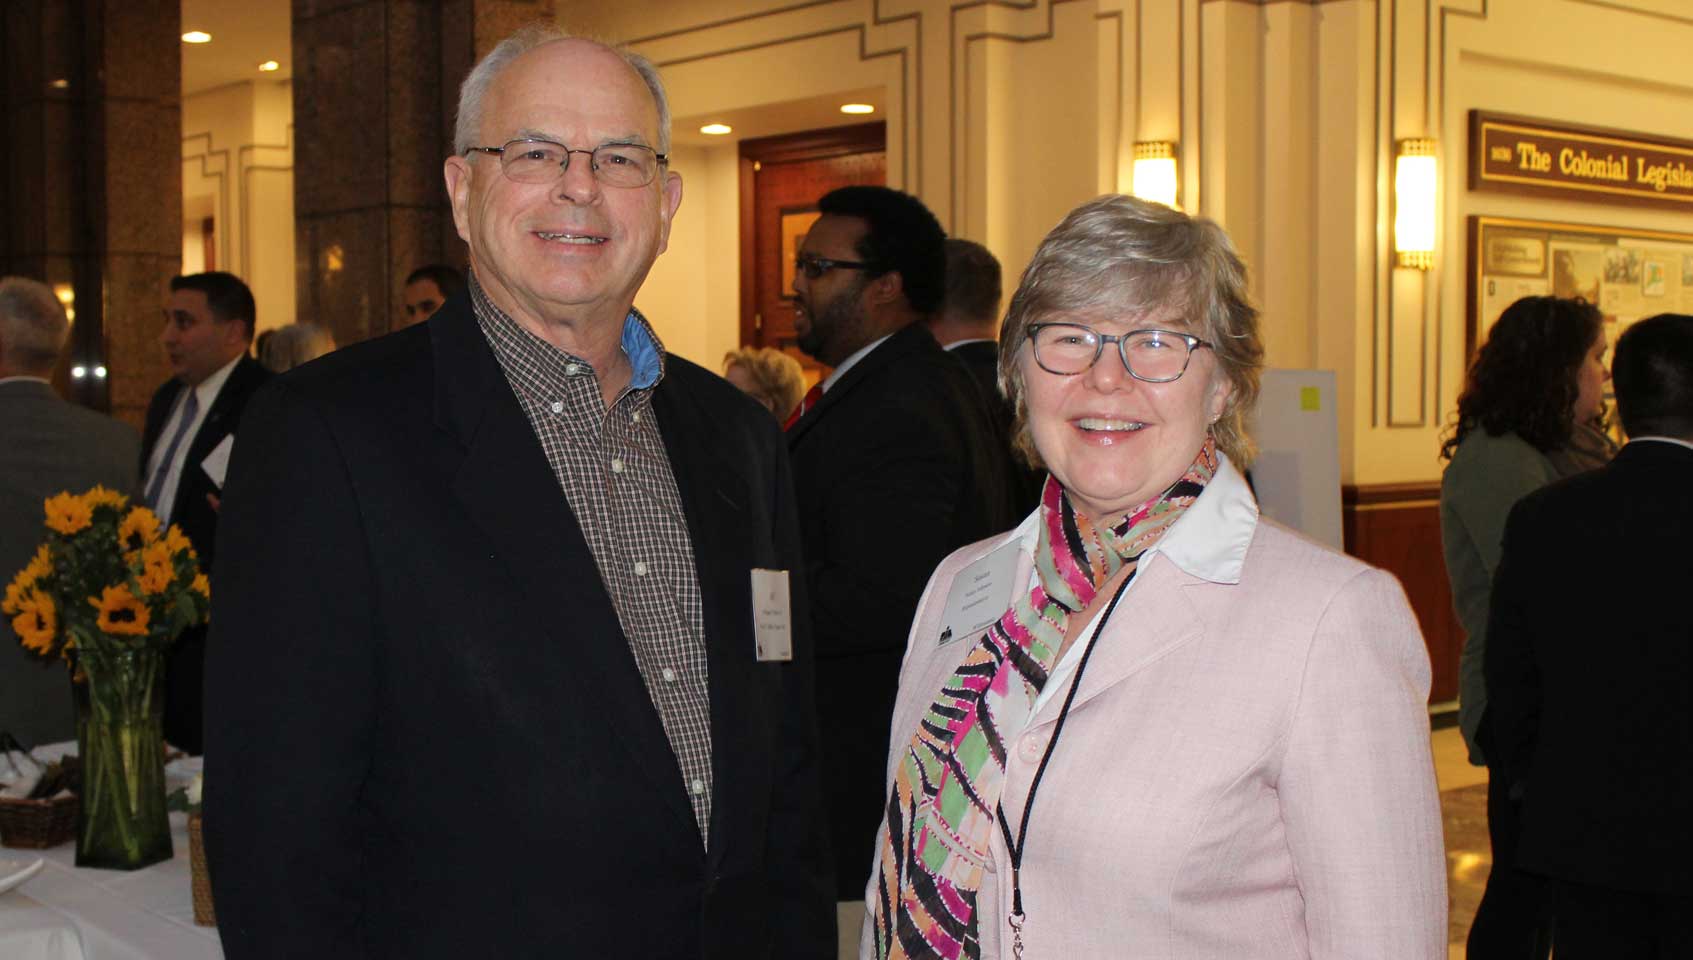 L-R PIACT Director and Legislative Chairperson William F. Malloy Jr., CIC; and Rep. Susan M. Johnson, D-49.